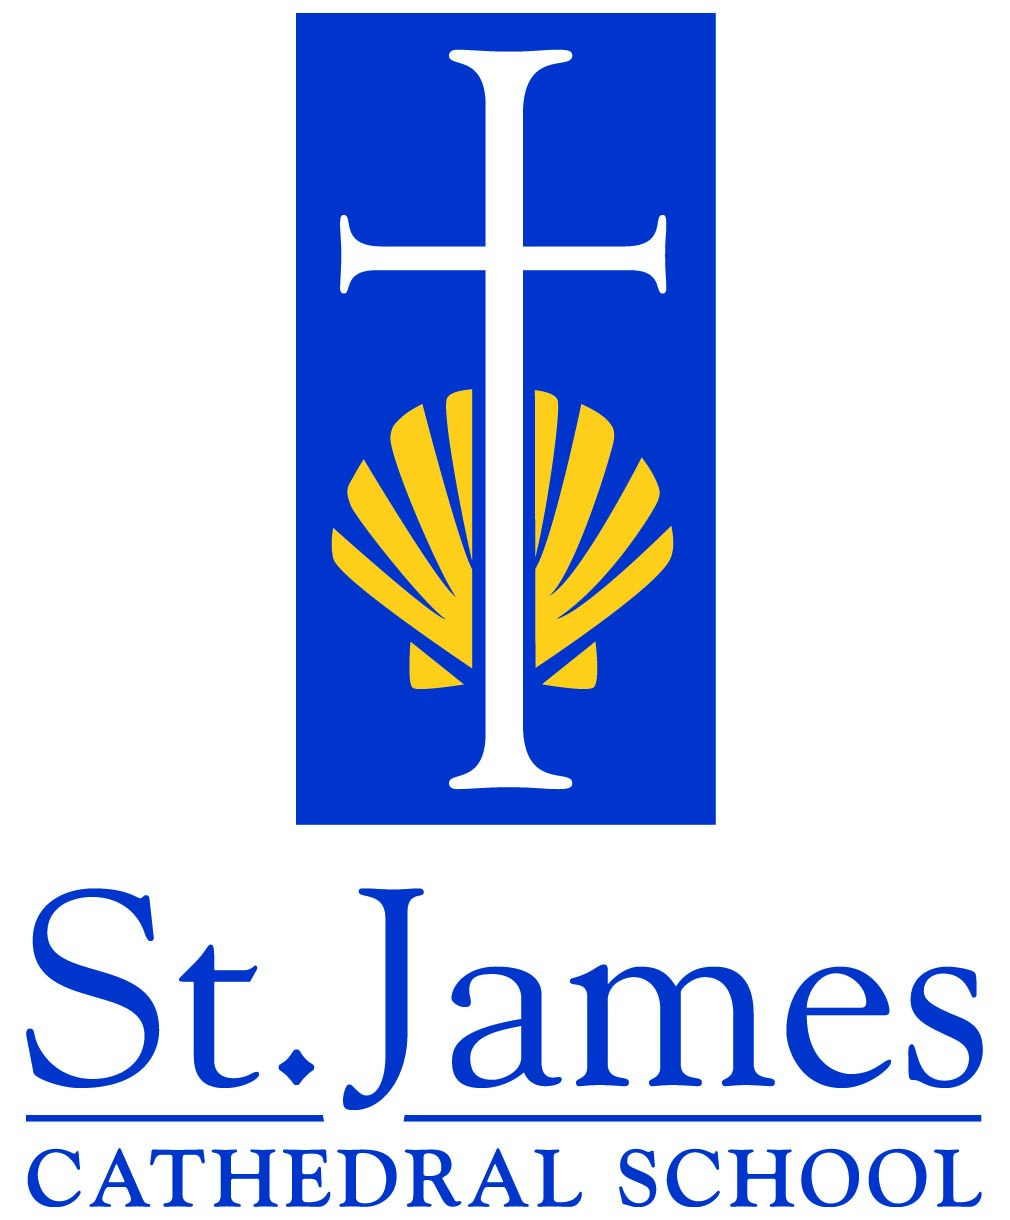 St. James Cathedral School